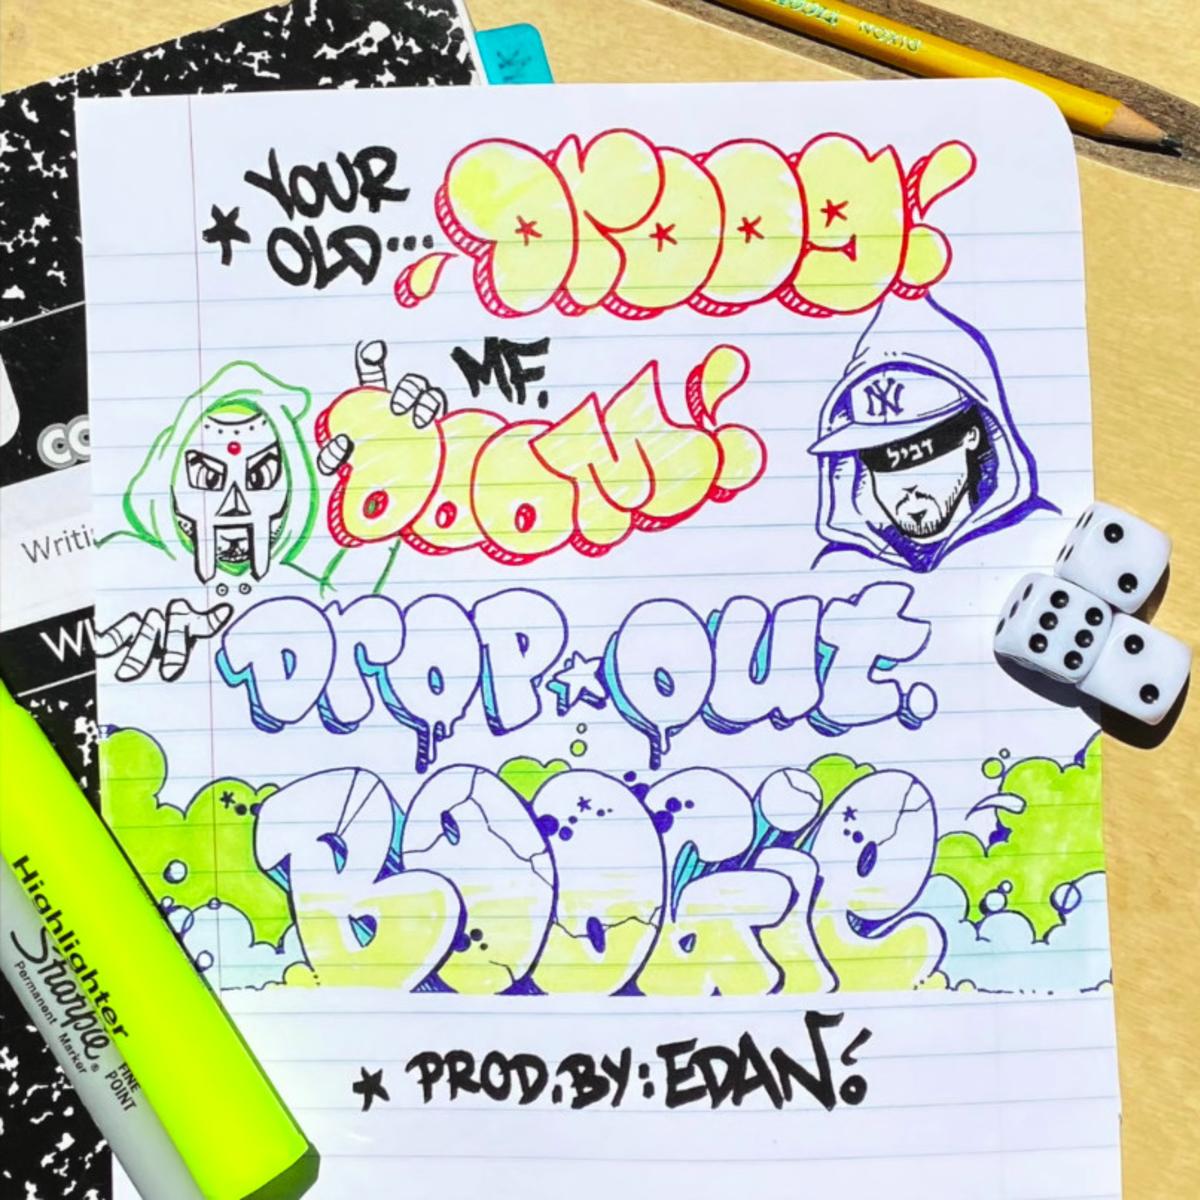 Your Old Droog x MF DOOM - Dropout Boogie (Prod. By Edan) 1